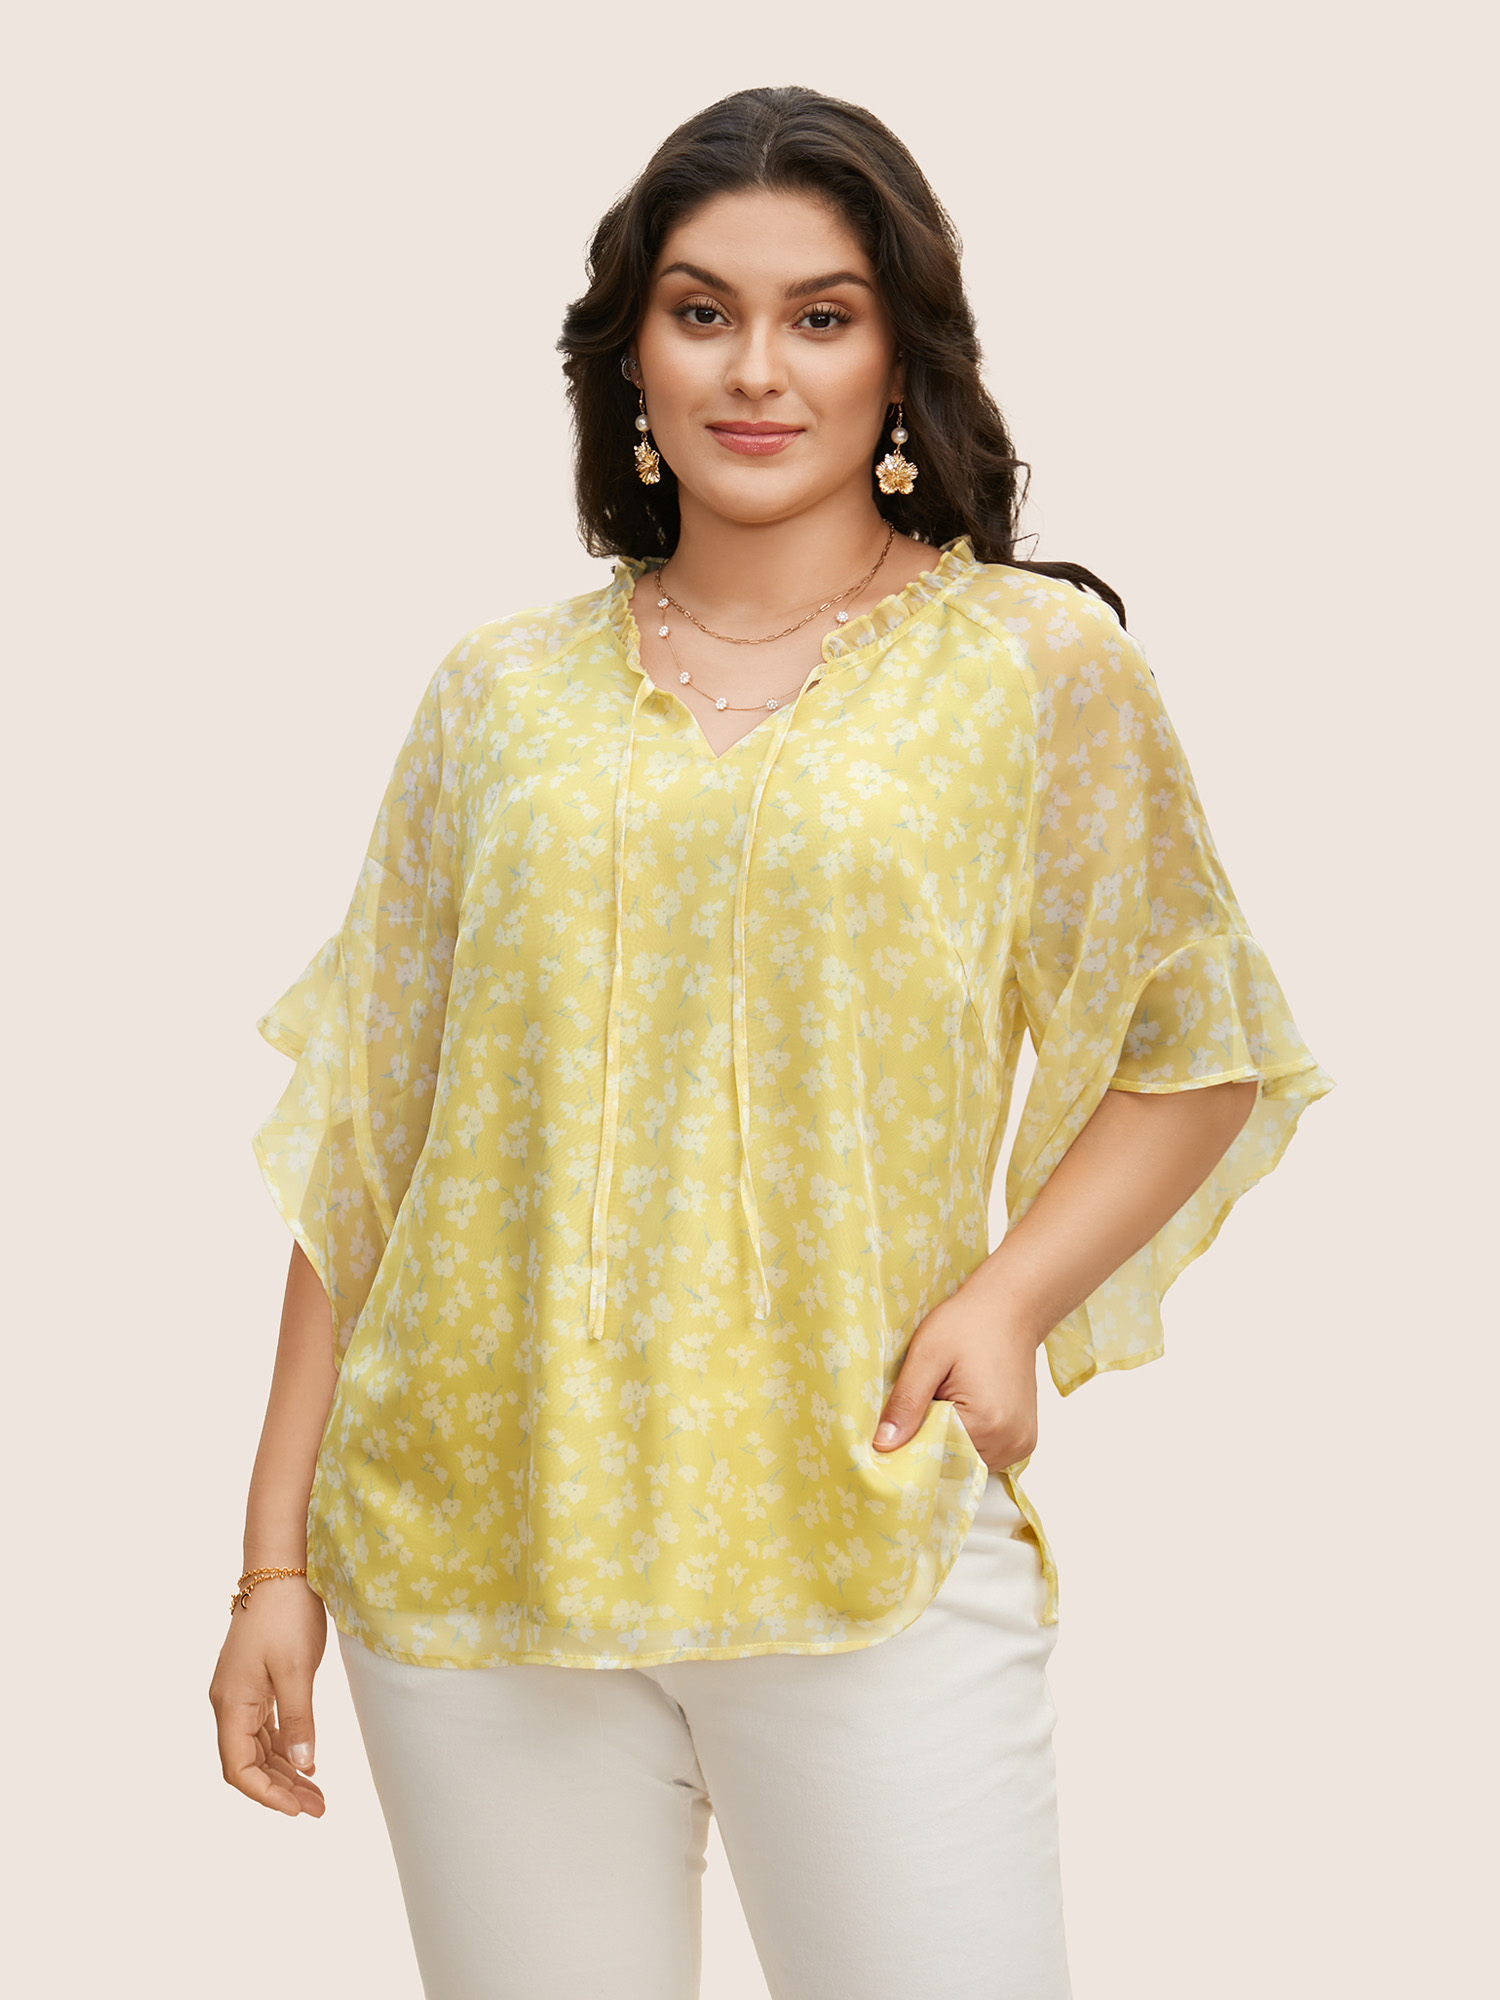 

Plus Size YellowGreen Floral Tie Knot Flutters Bell Sleeve Blouse Women Elegant Half Sleeve V-neck Everyday Blouses BloomChic